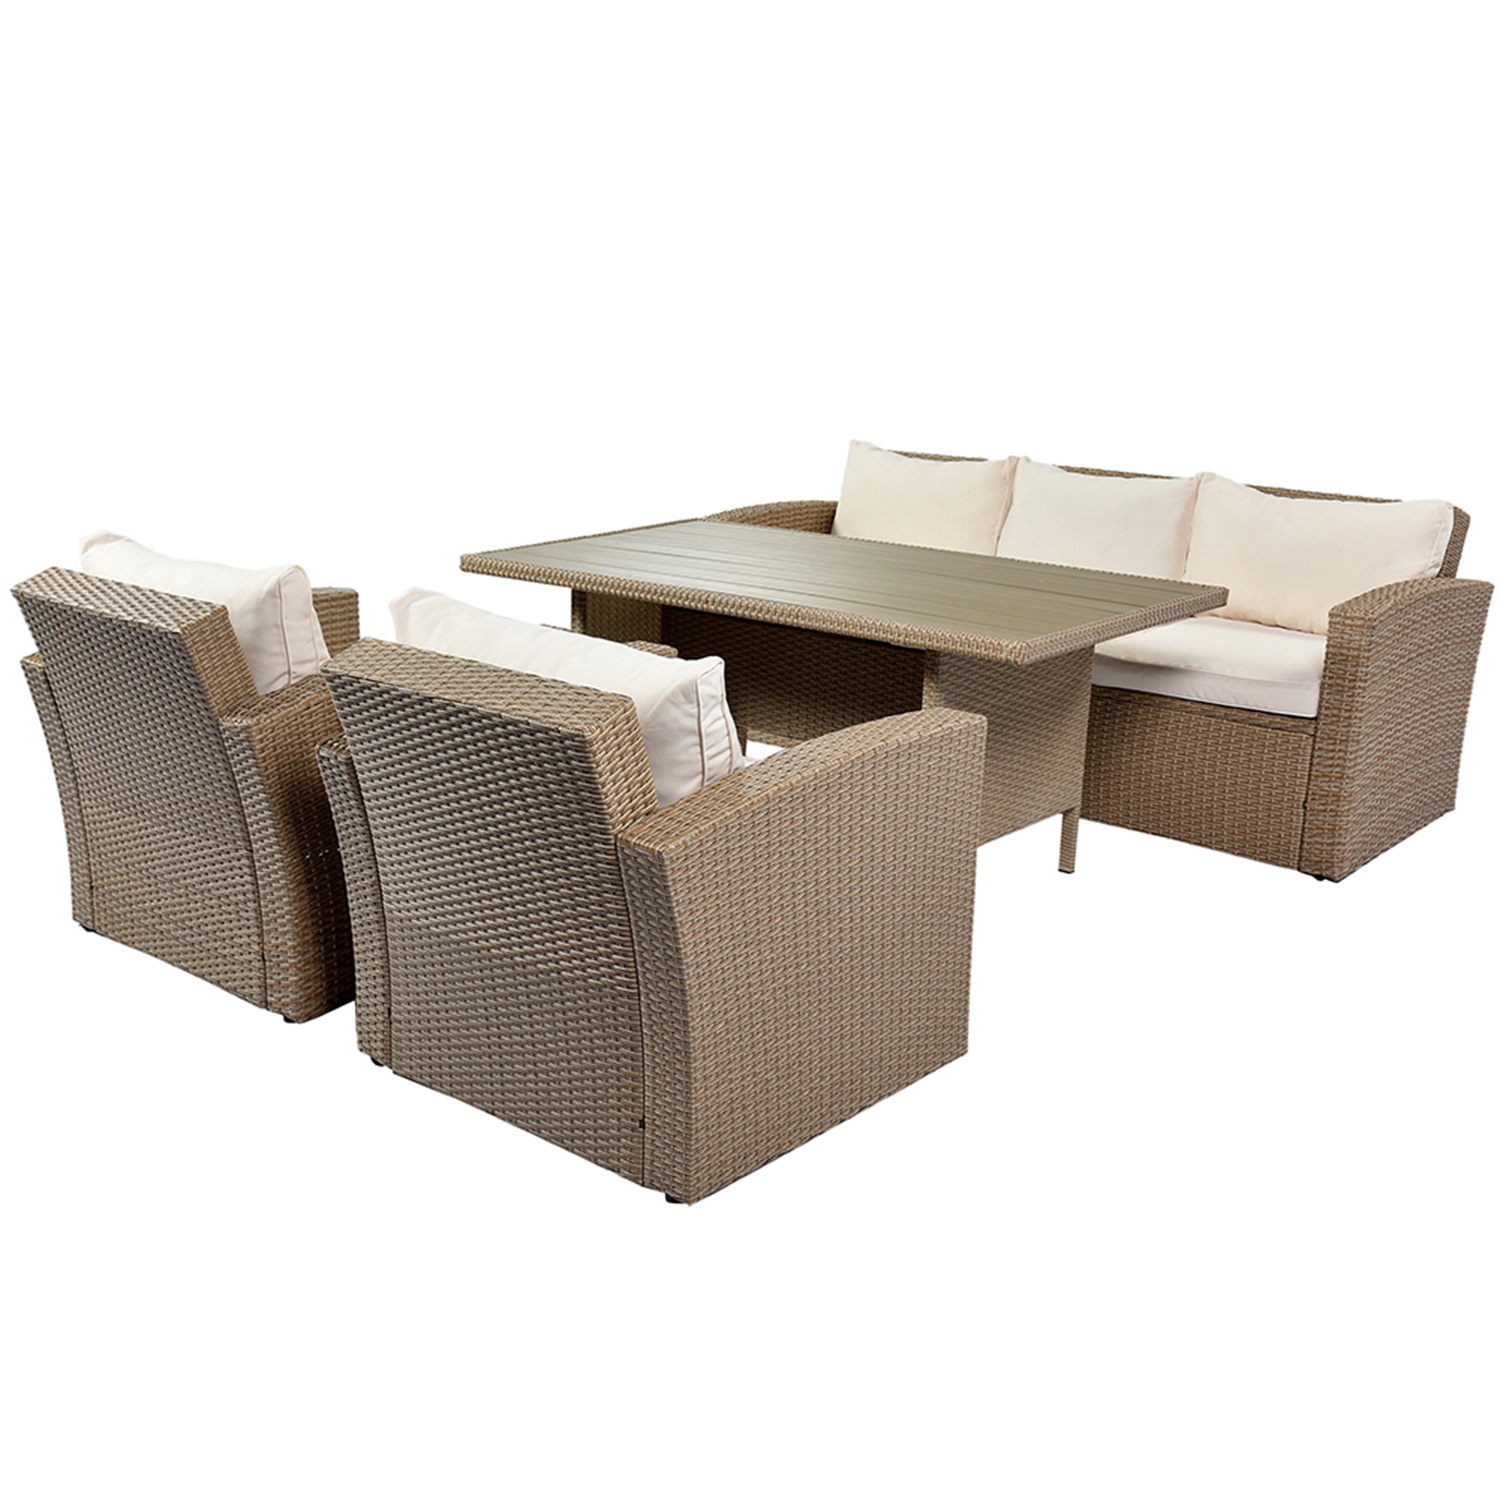 Canddidliike 4 Pieces Patio Conversation Furniture Set Cushioned Sofa Dining Table Brown Wicker - image 4 of 8